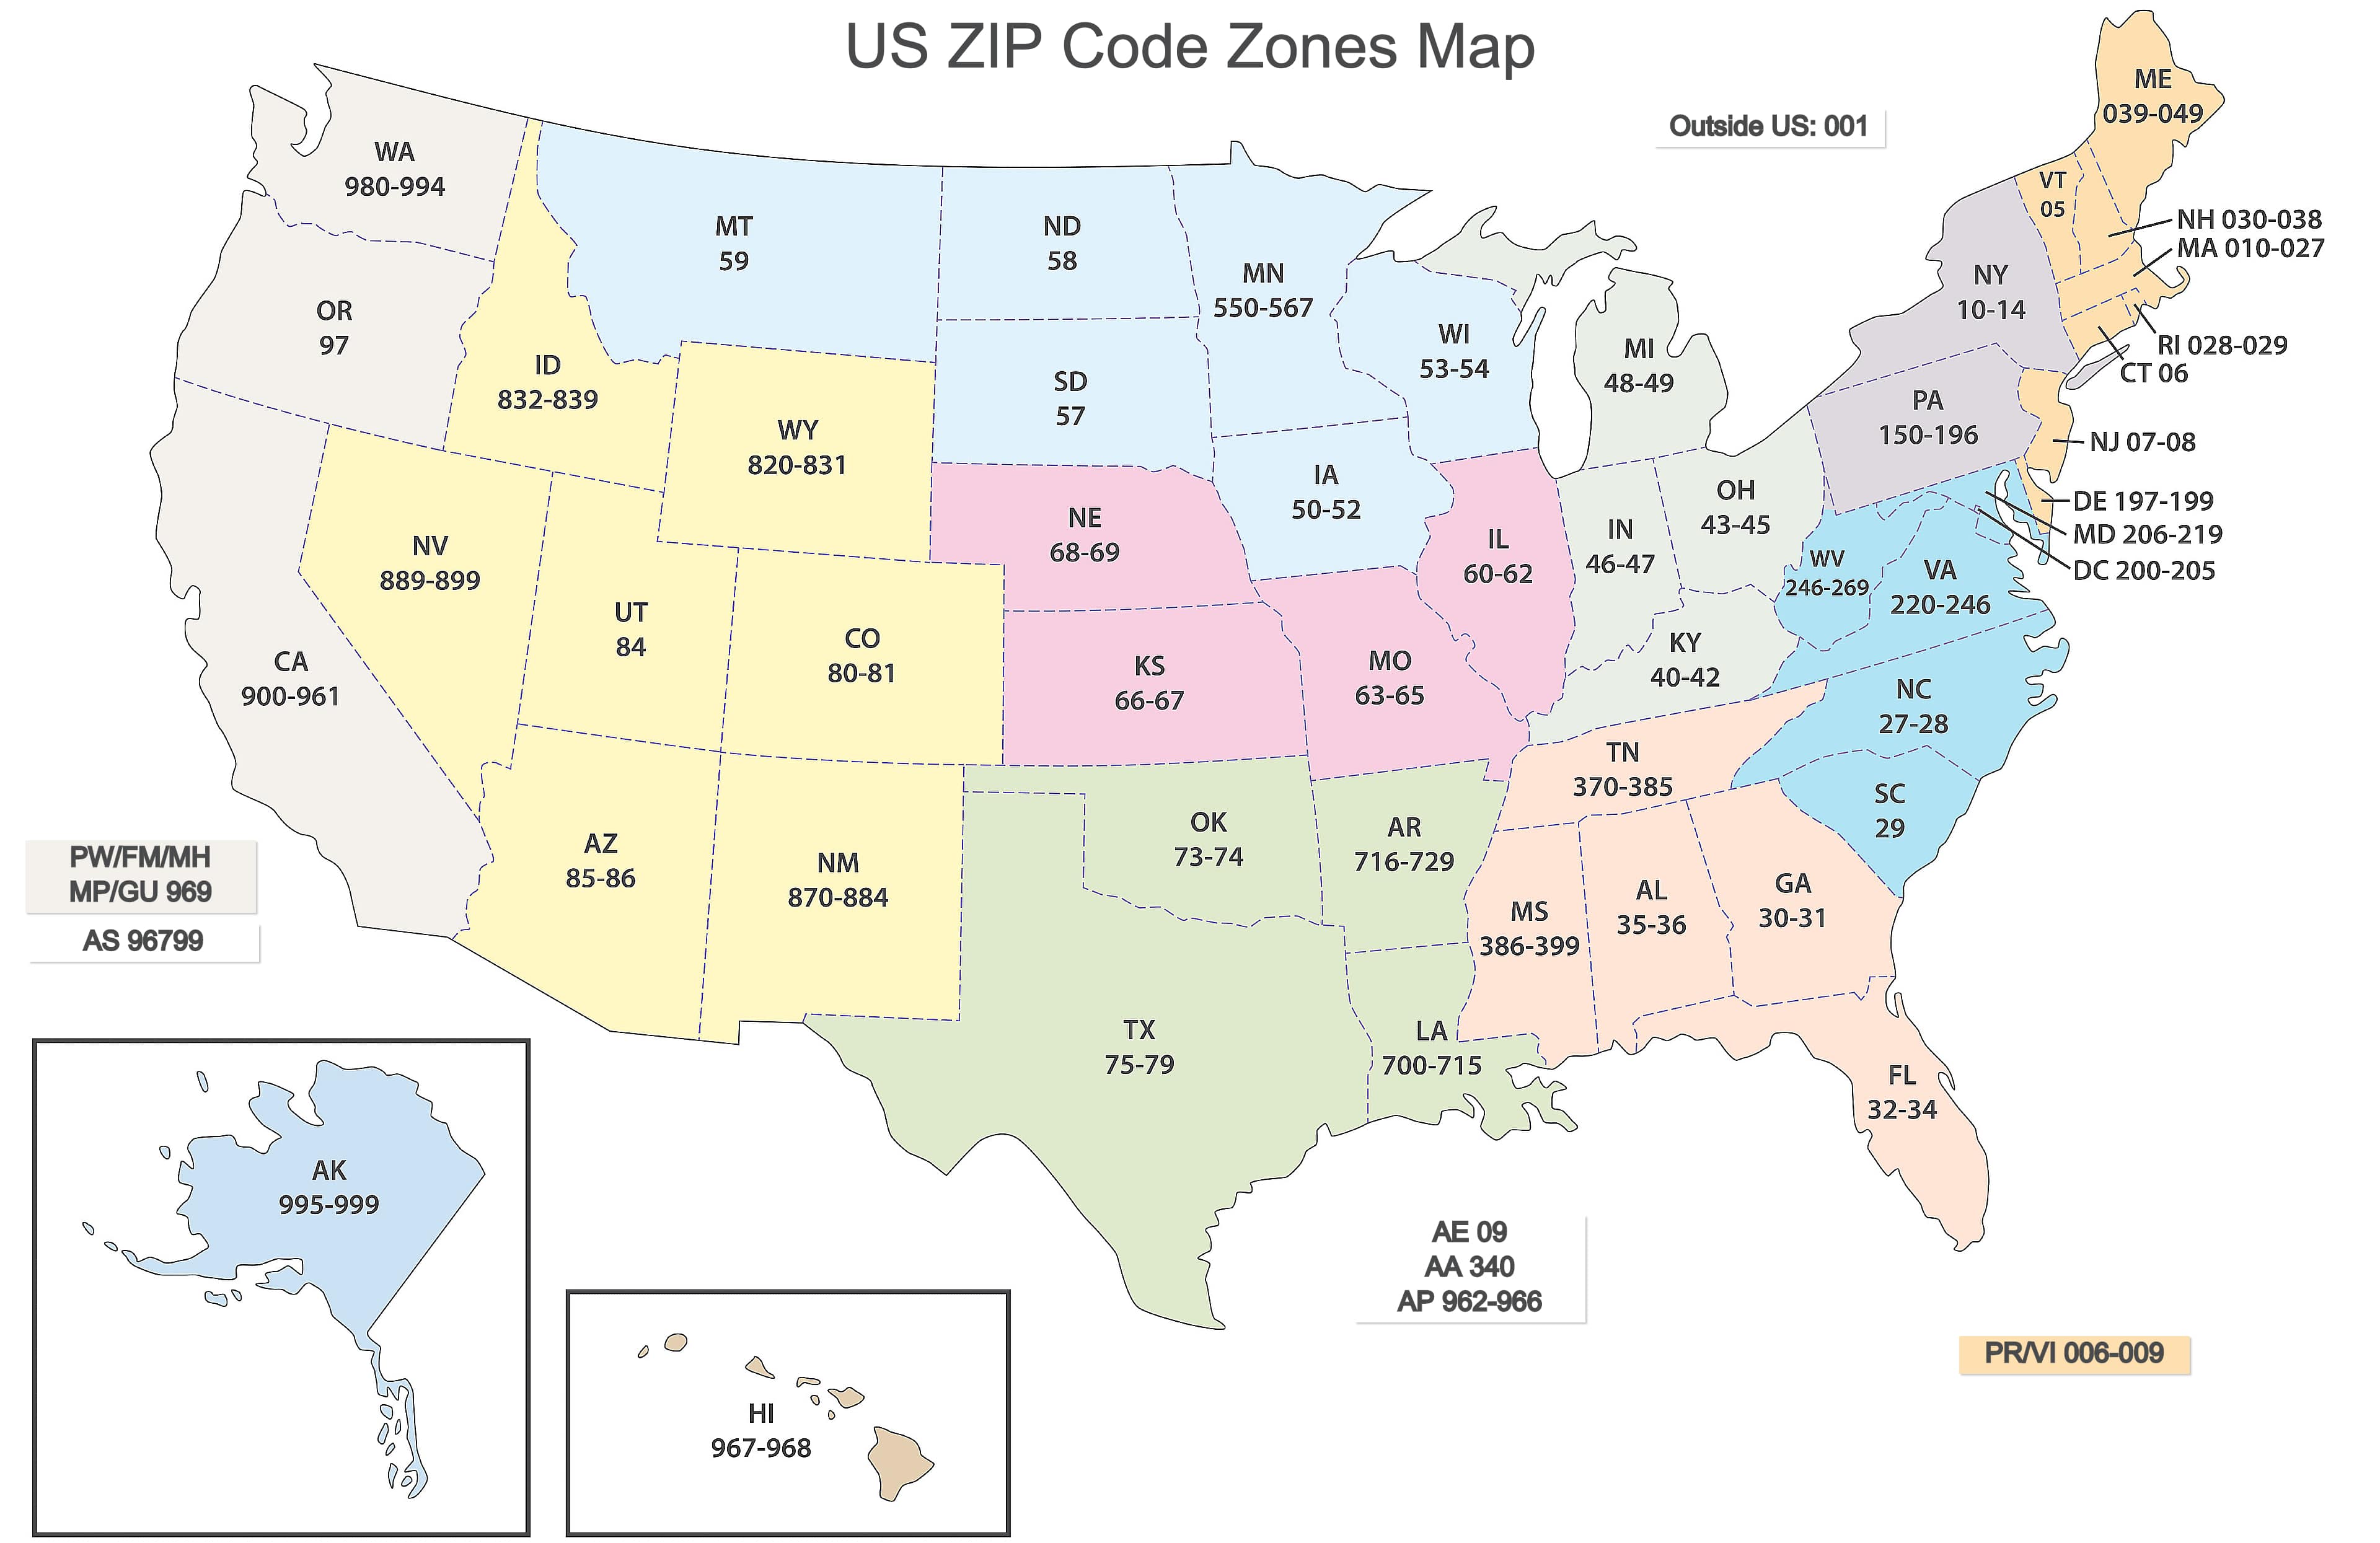 ZIP Code™ Lookup - What are ZIP Codes & How To Find Them